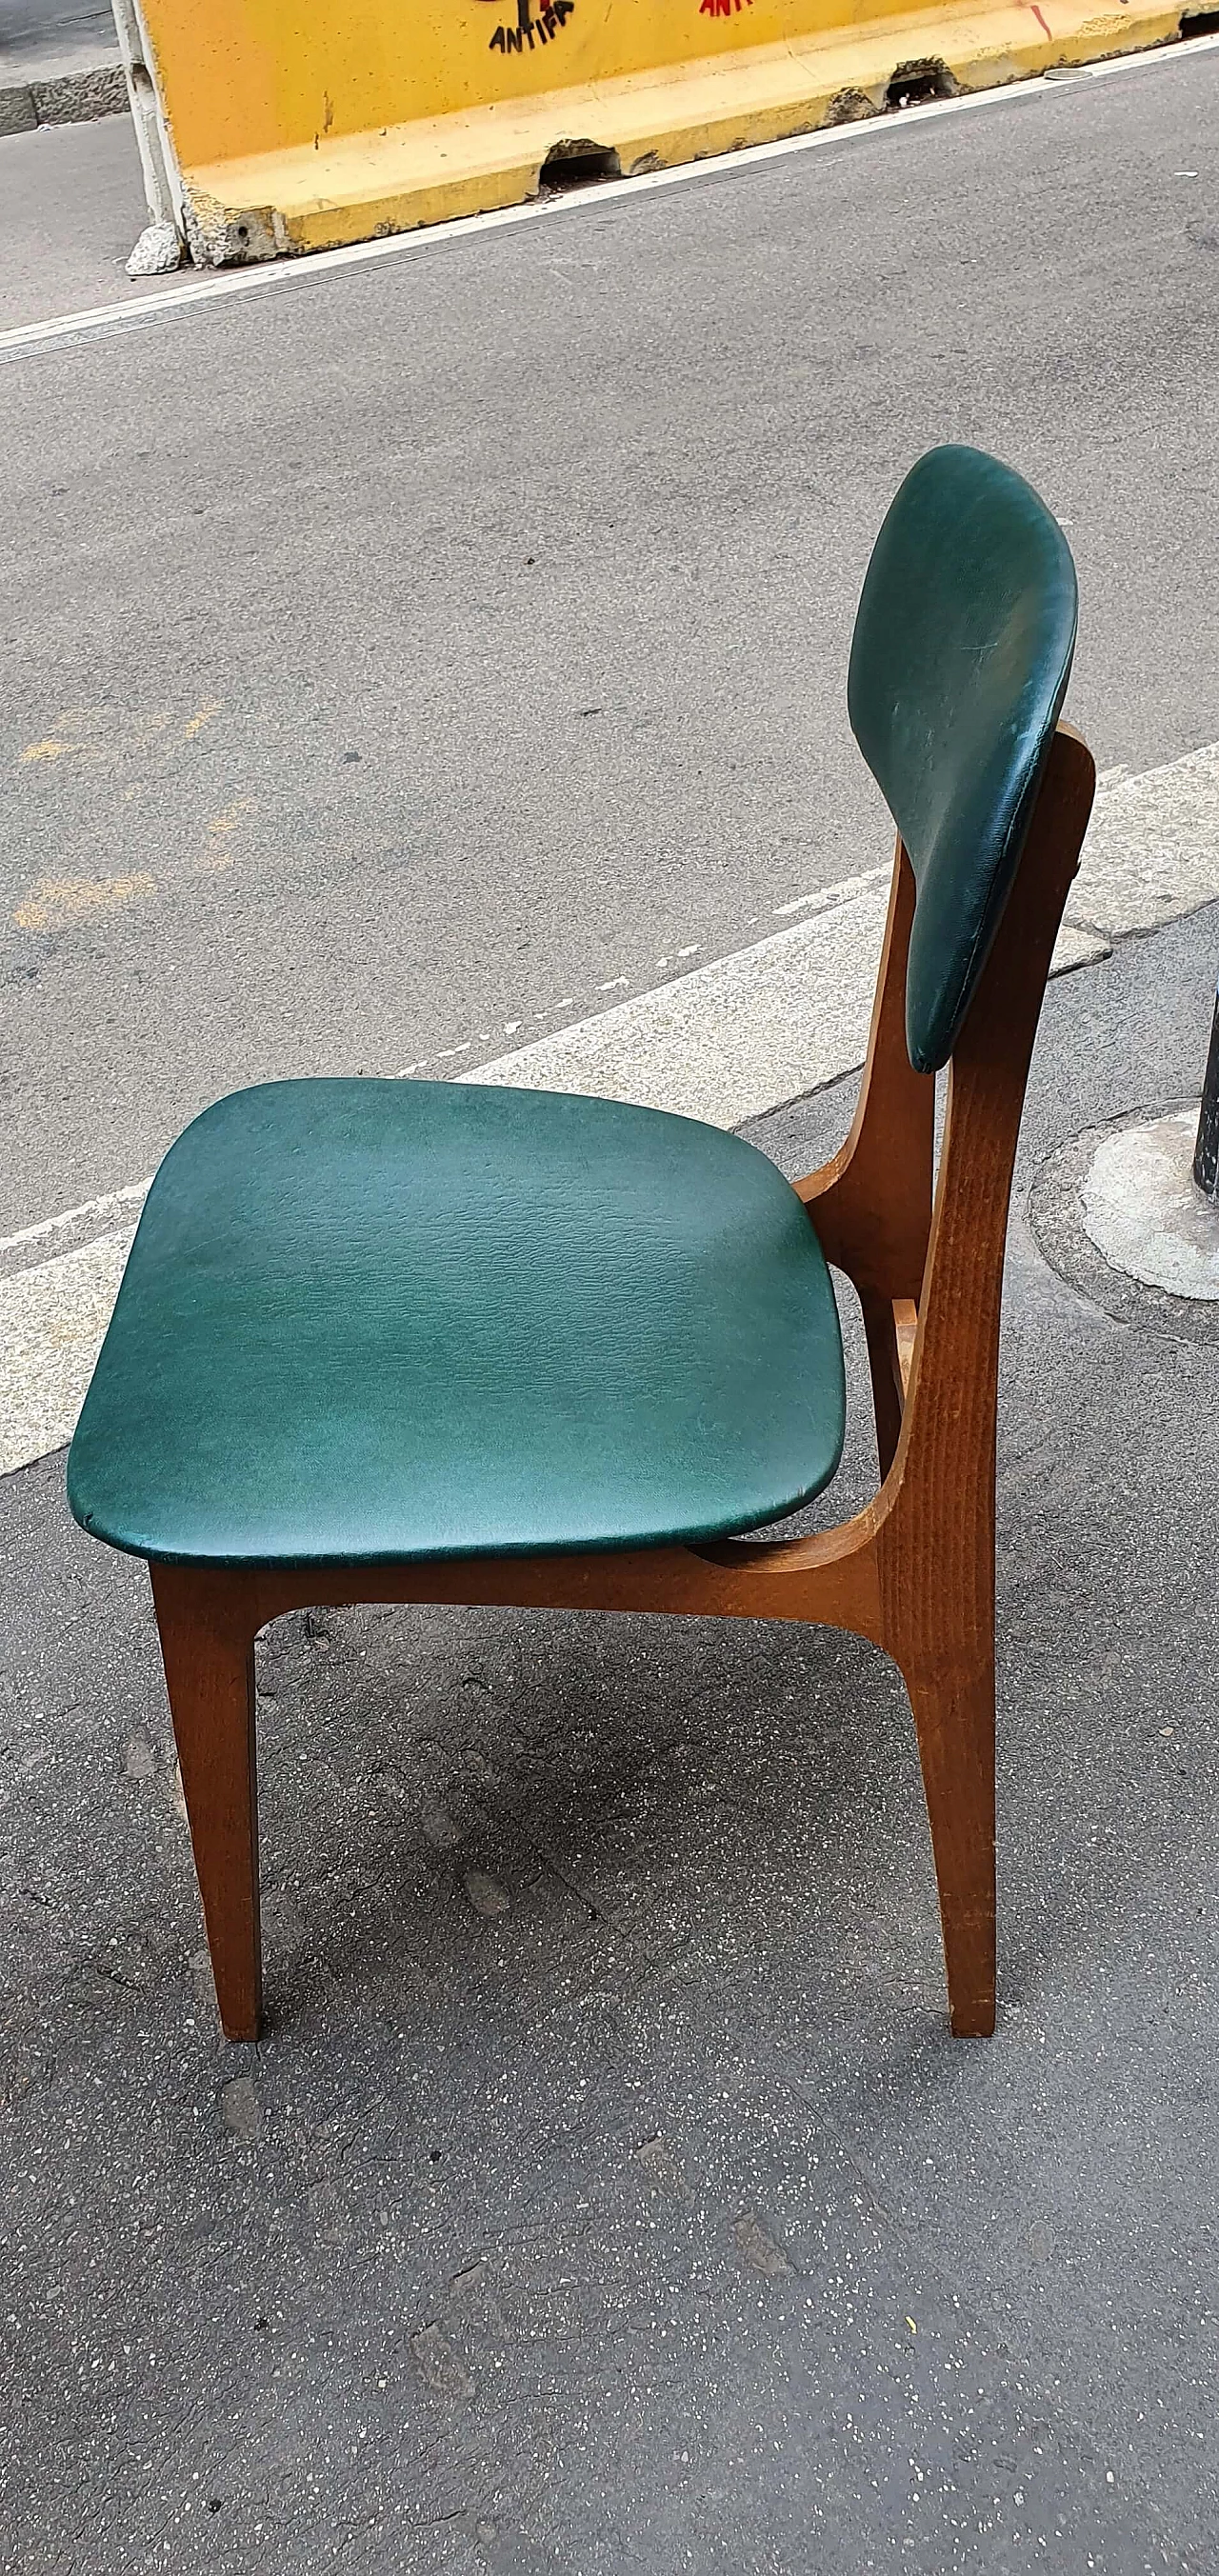 12 Wooden chairs with skai seat and back by SAM of Bergamo, 1970s 1268282